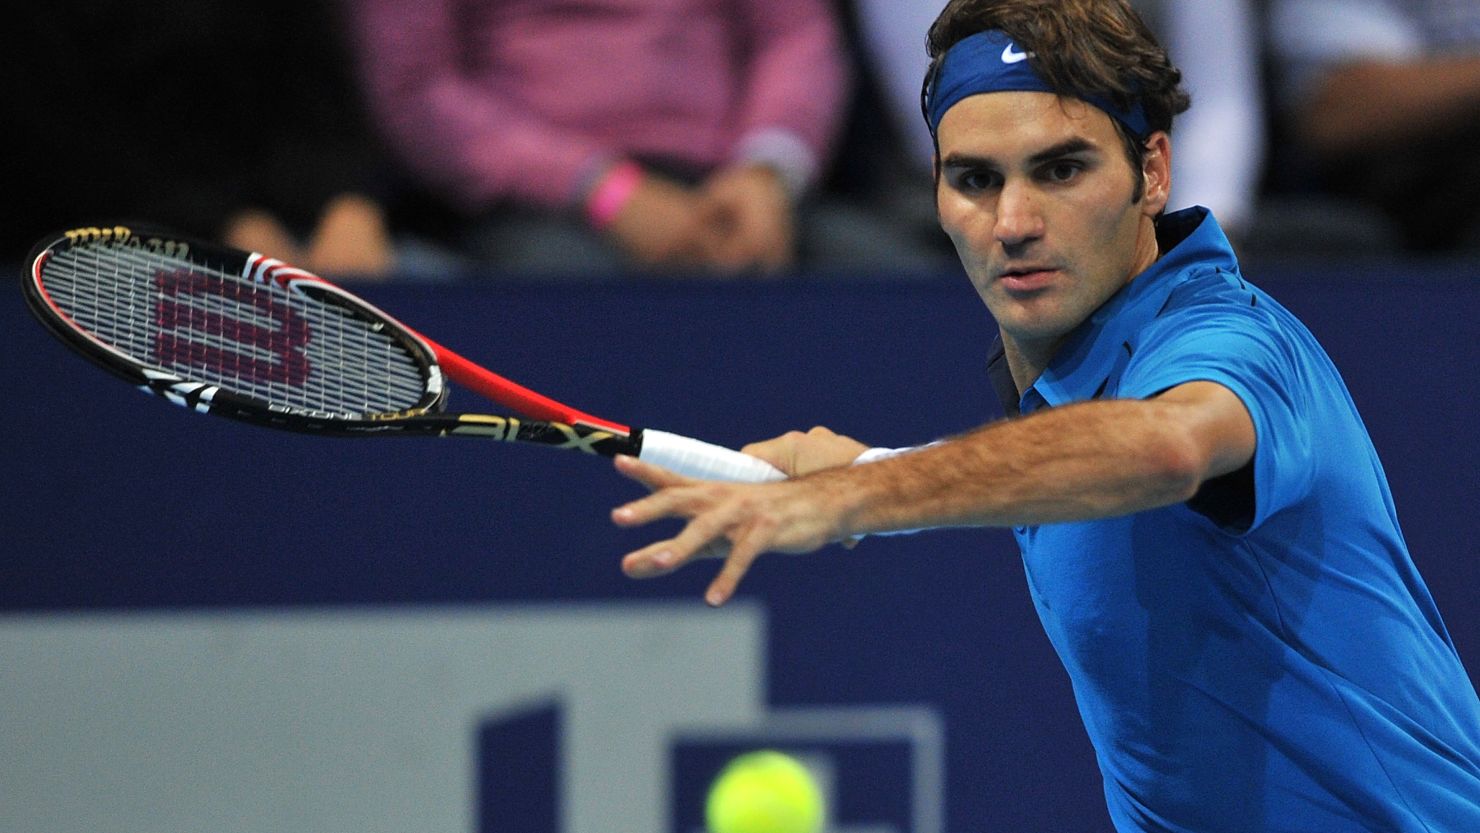 Roger Federer's fifth Swiss Indoor victory ended a 10-month ATP Tour title drought.